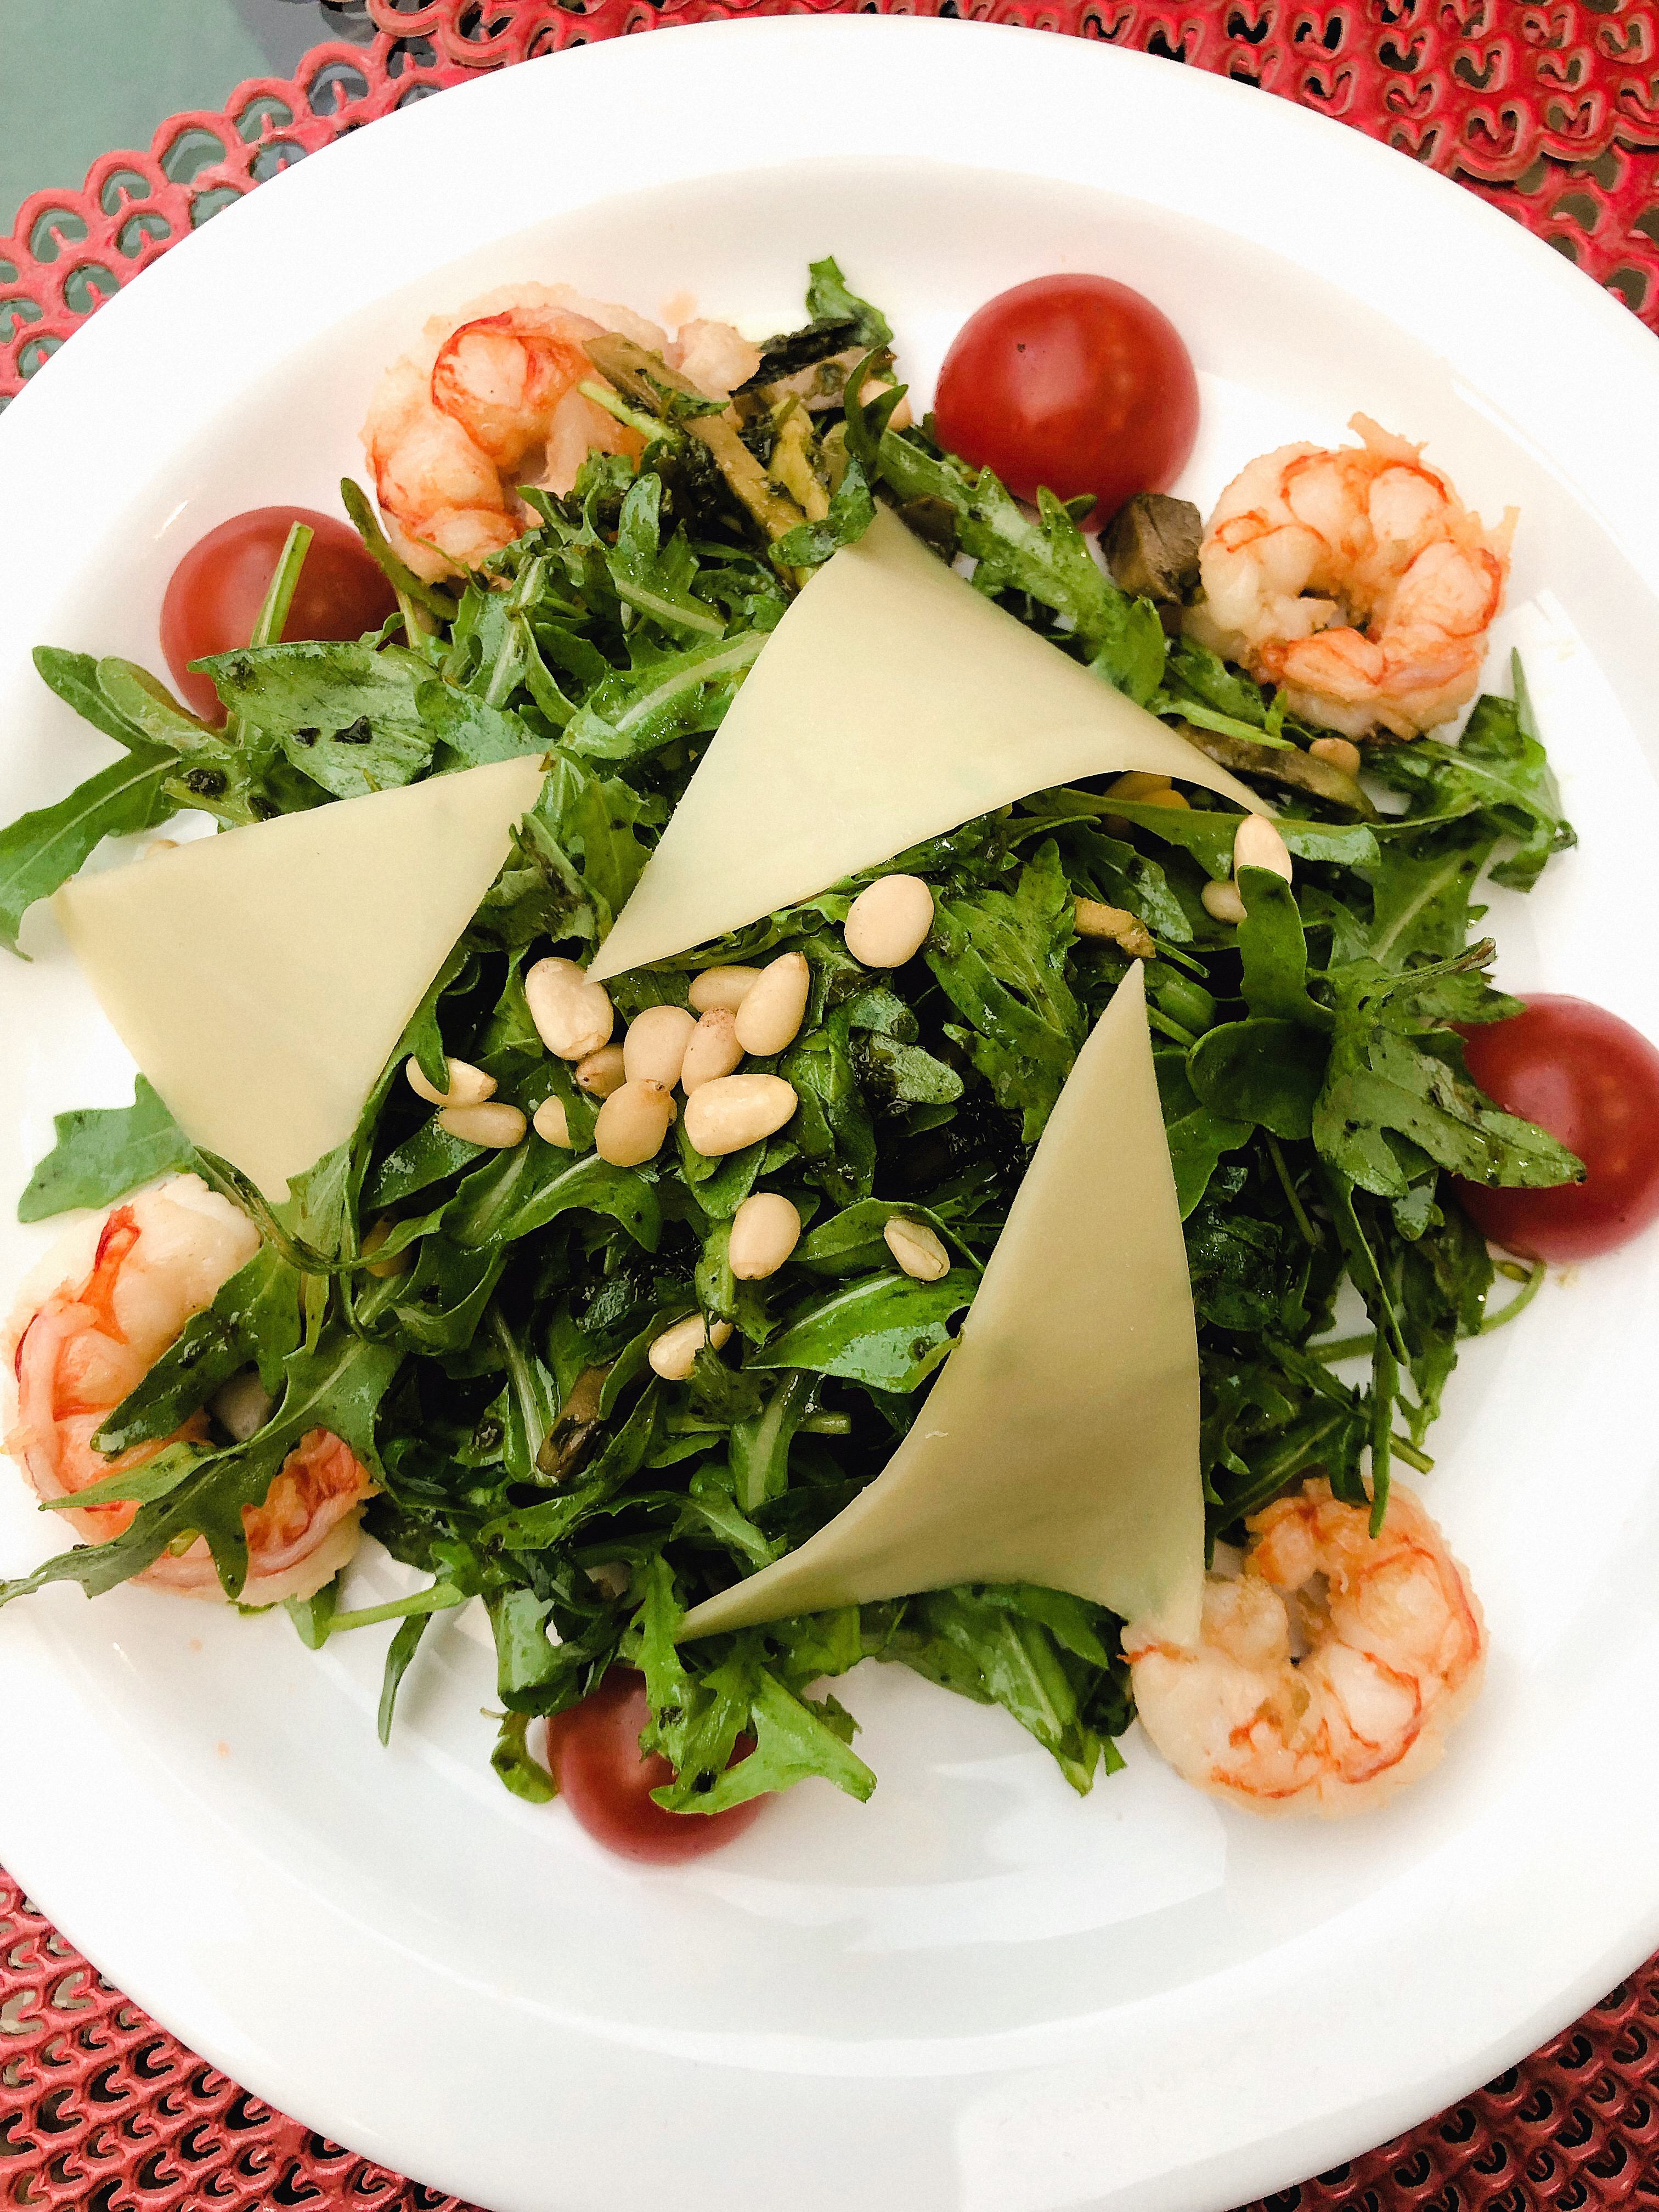 Served Shrimp salad with pine nuts and cheese